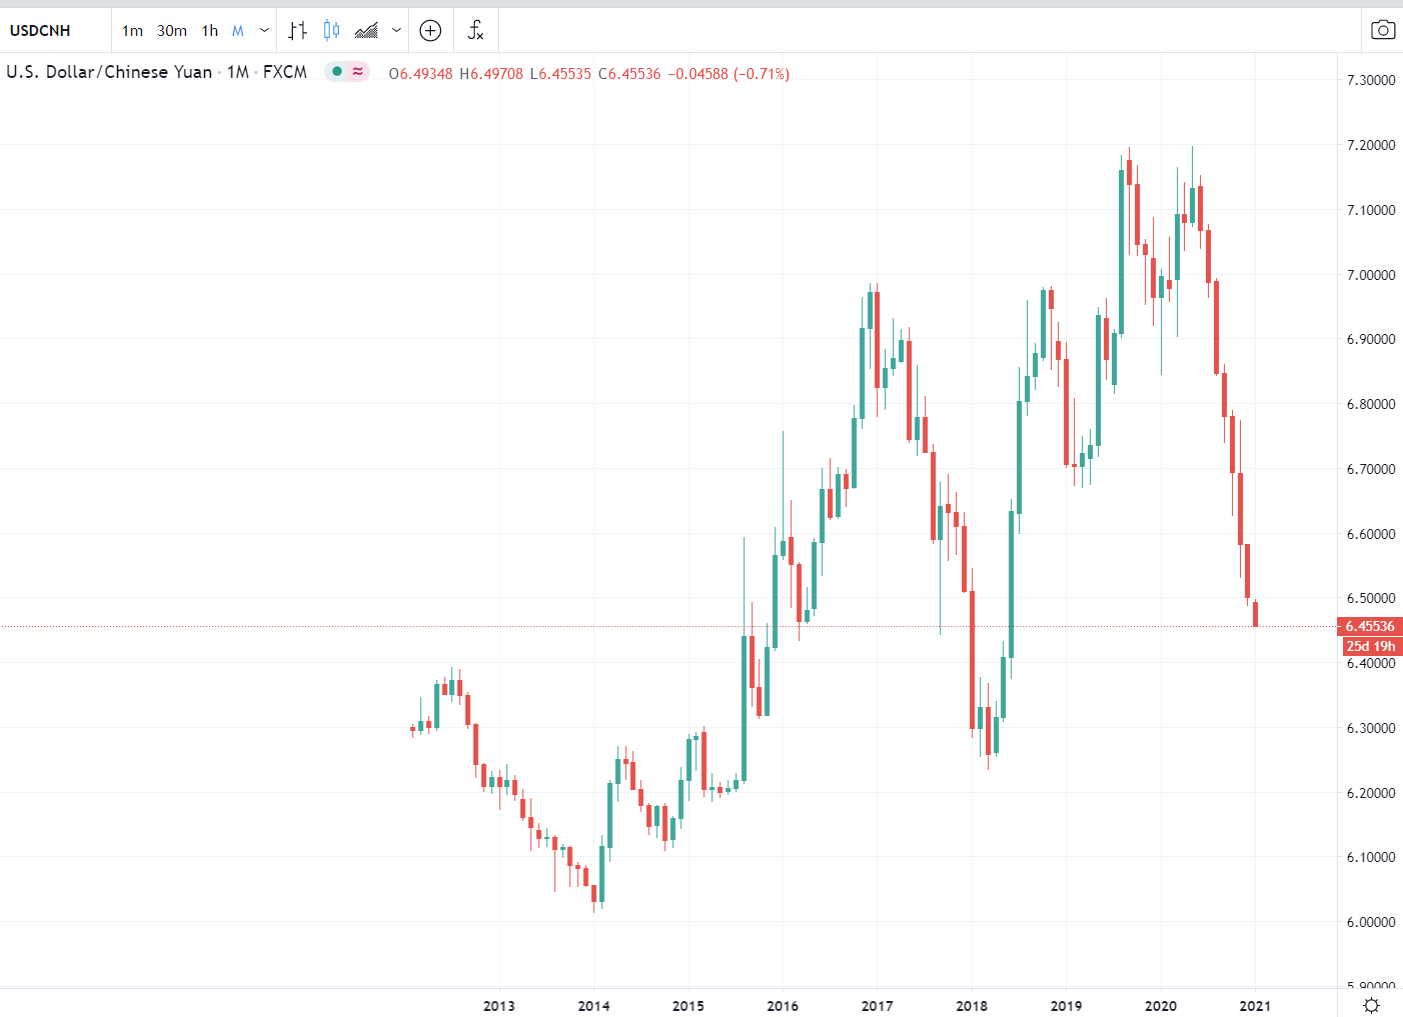 USD/CNH is under 6.5 for the first time since H1 of 2018 (and has near;ly recovered all of its Trump trade war loss).